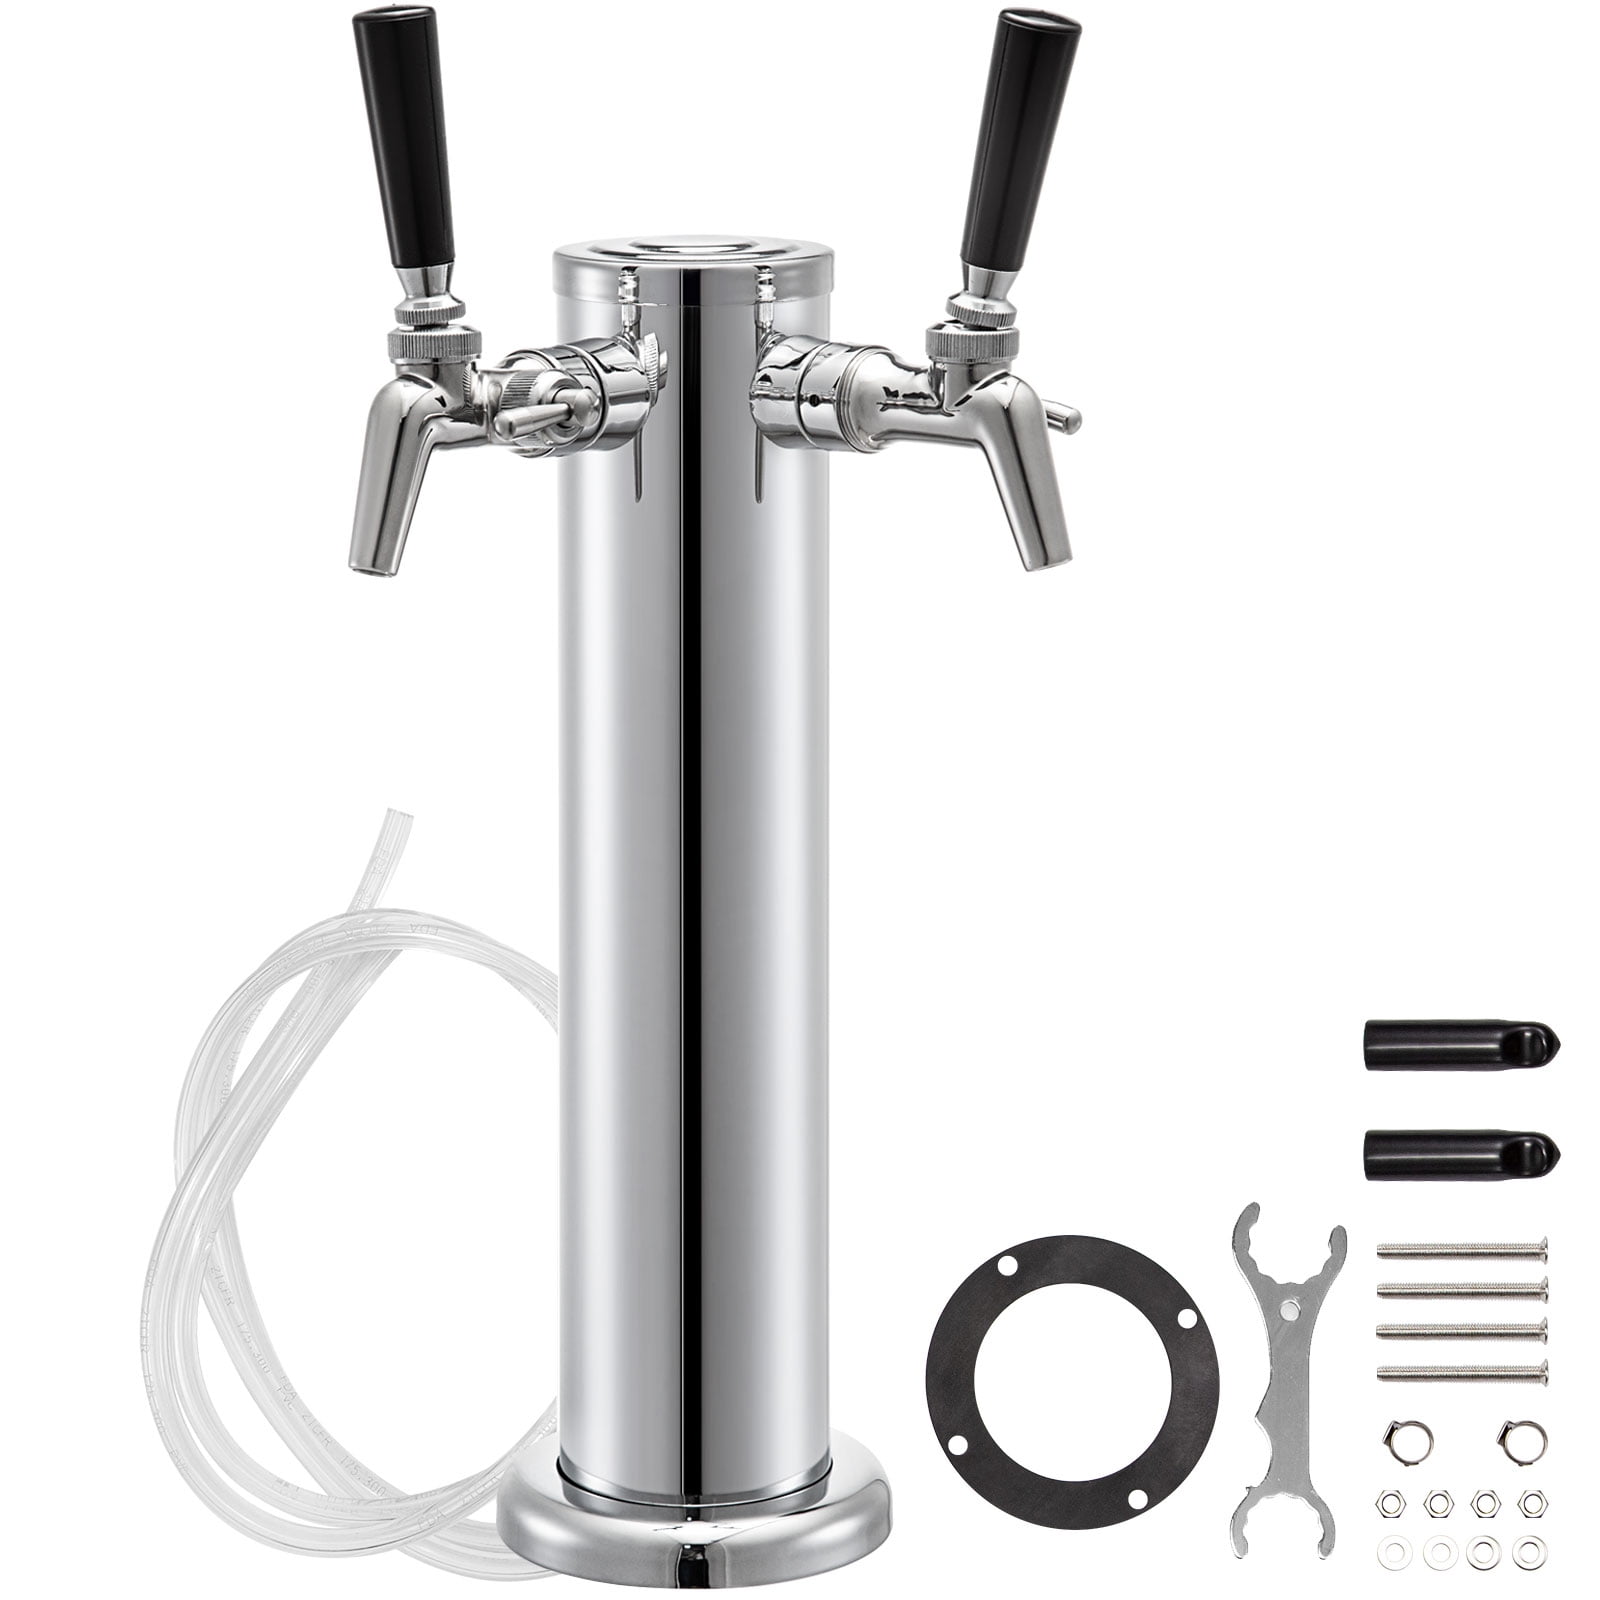 Single Tap Faucet Stainless Chrome Draft Beer Tower Brew Bar For Kegerator Gift 